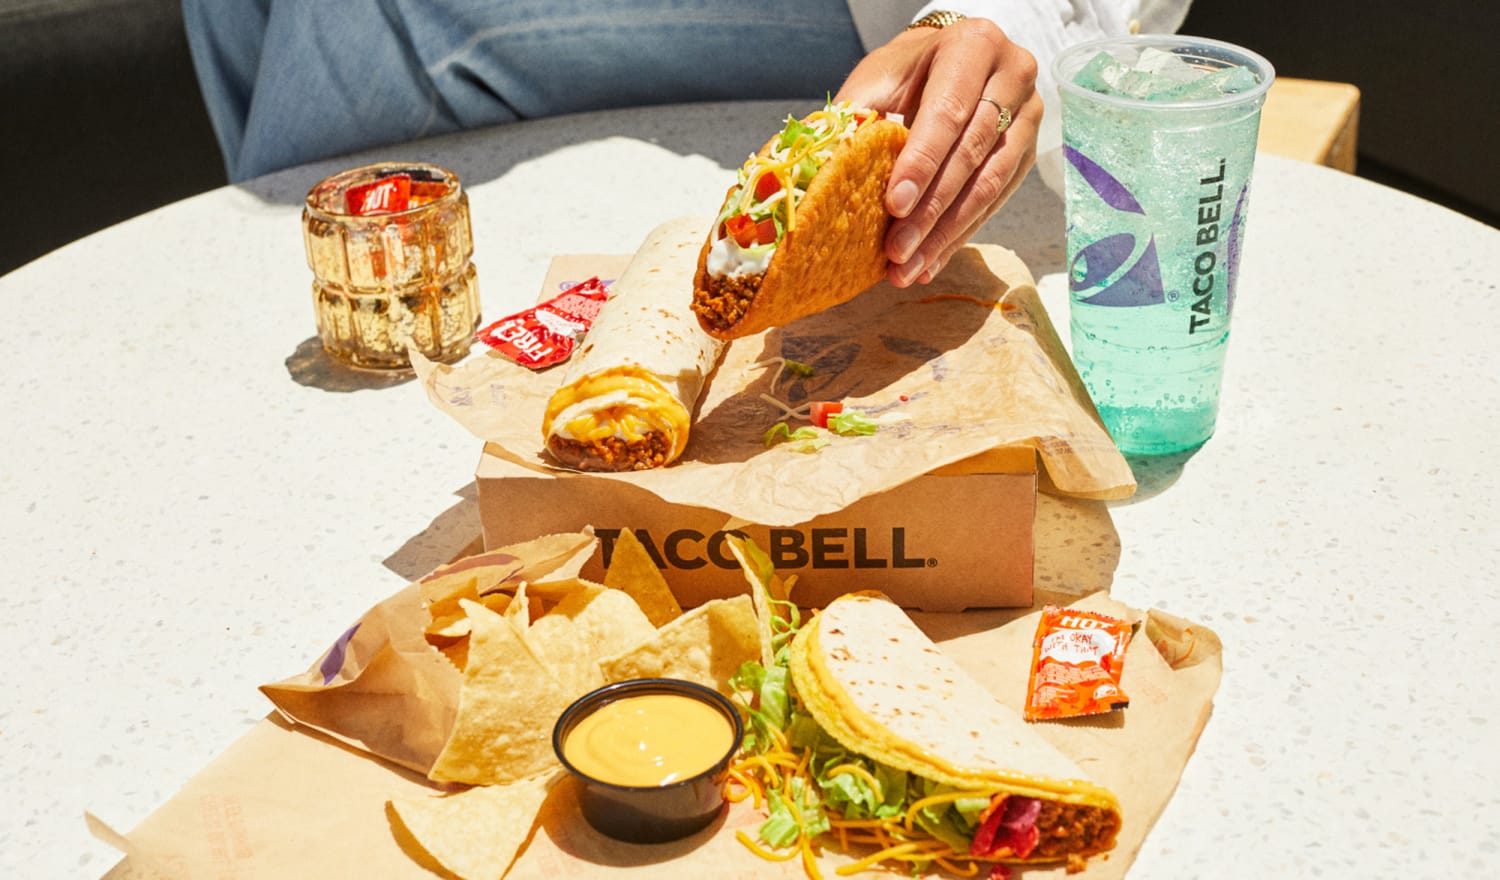 Taco Bell enters the value wars with a $7 meal deal